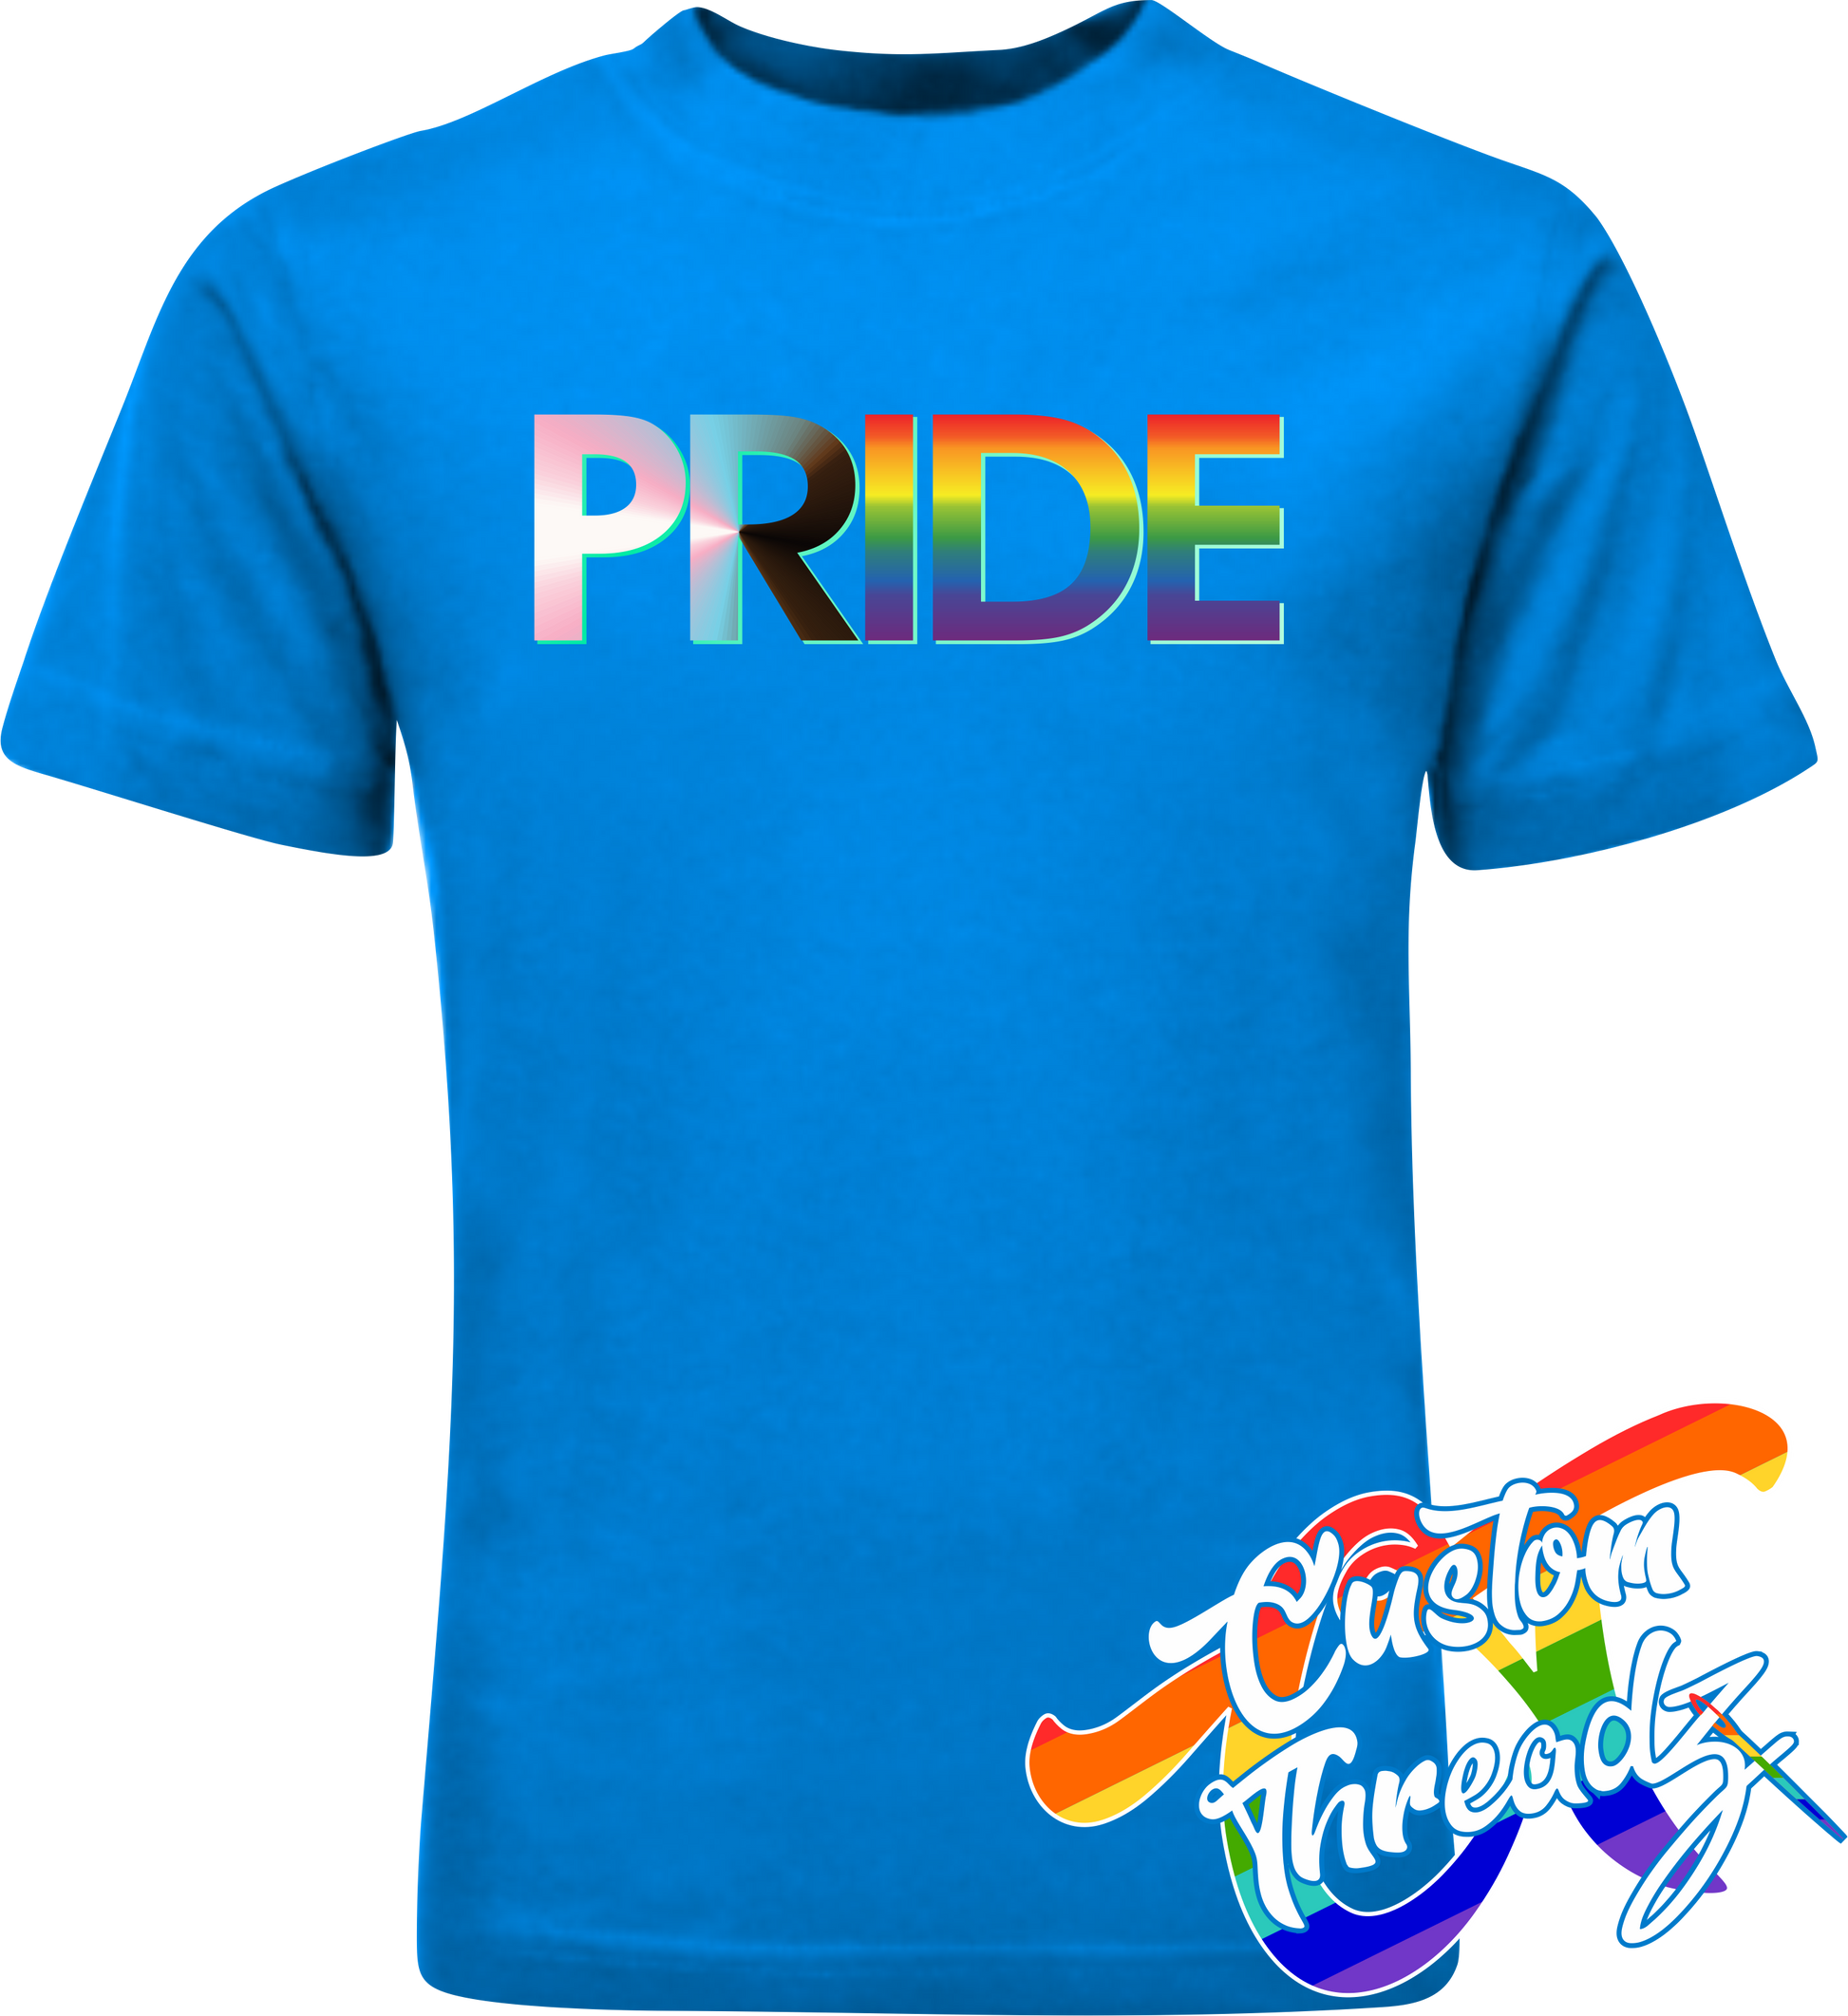 sapphire tee with progress pride flag DTG printed design